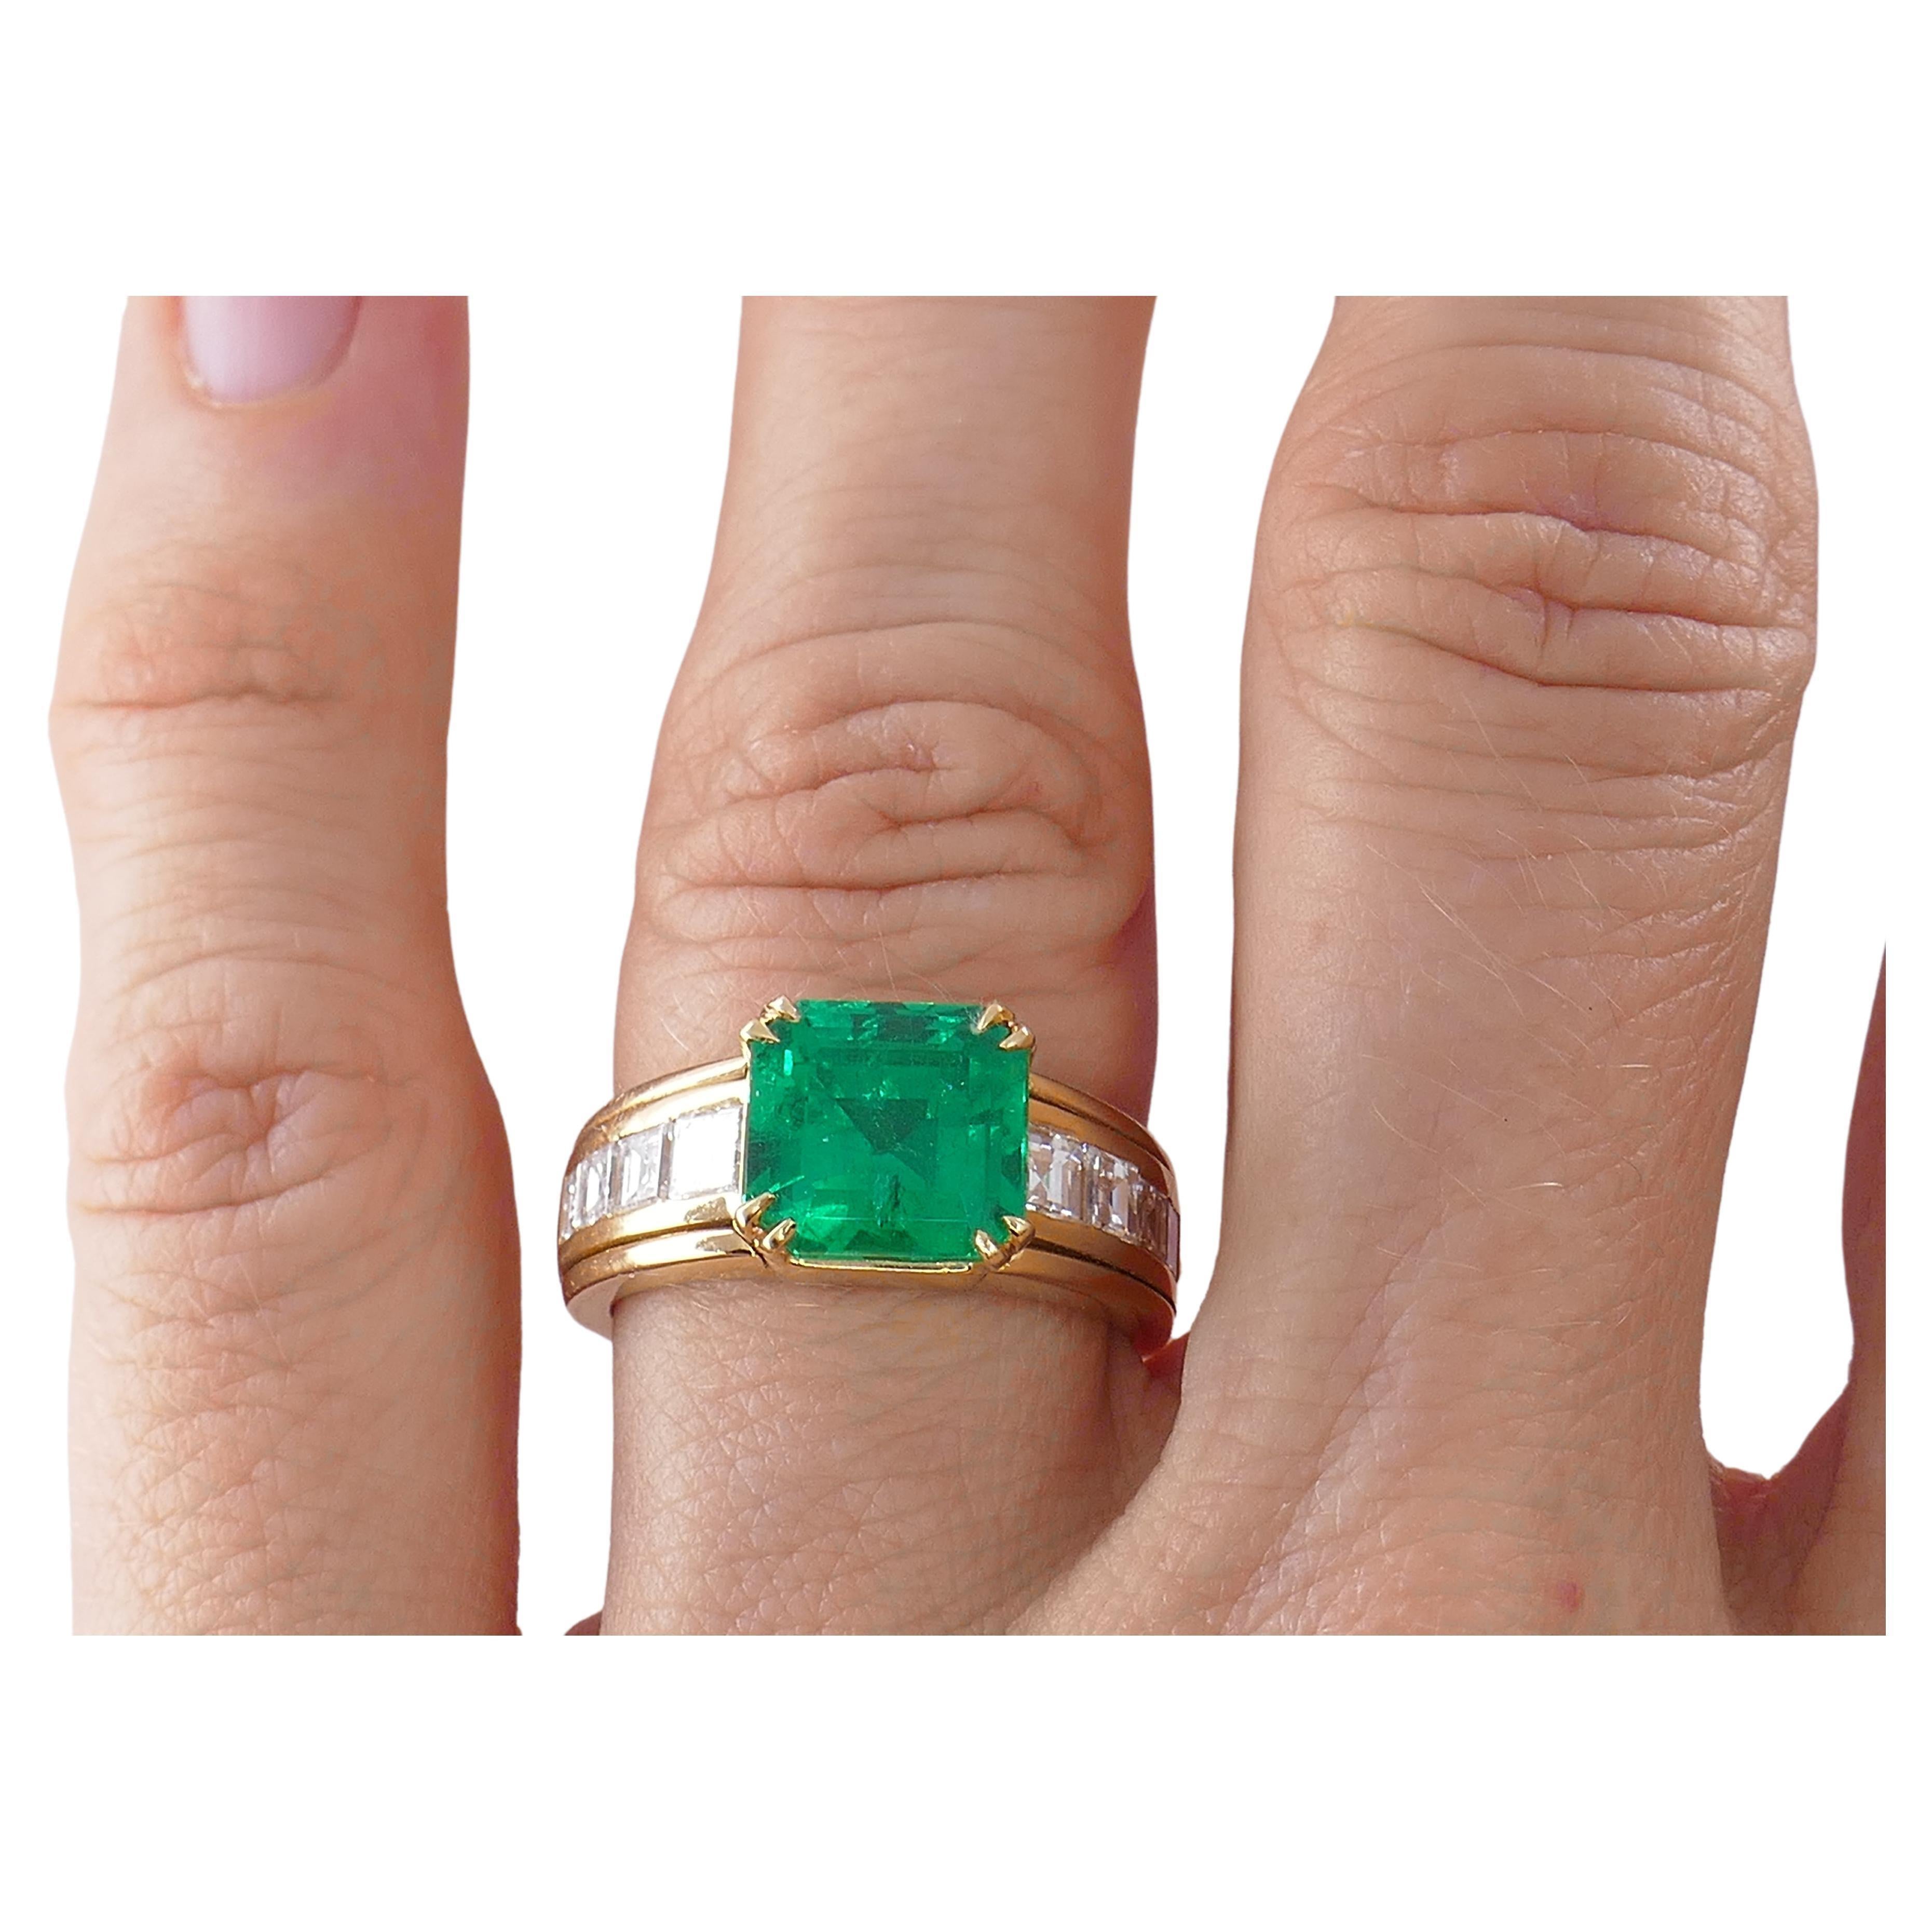 A gorgeous emerald ring, made of 18k gold, featuring diamonds.
It's a classic ring with an emerald cut emerald (supposedly Columbian), four prong set. Four emerald cut diamonds (eight in total) are channel set in the shank, on the sides of the